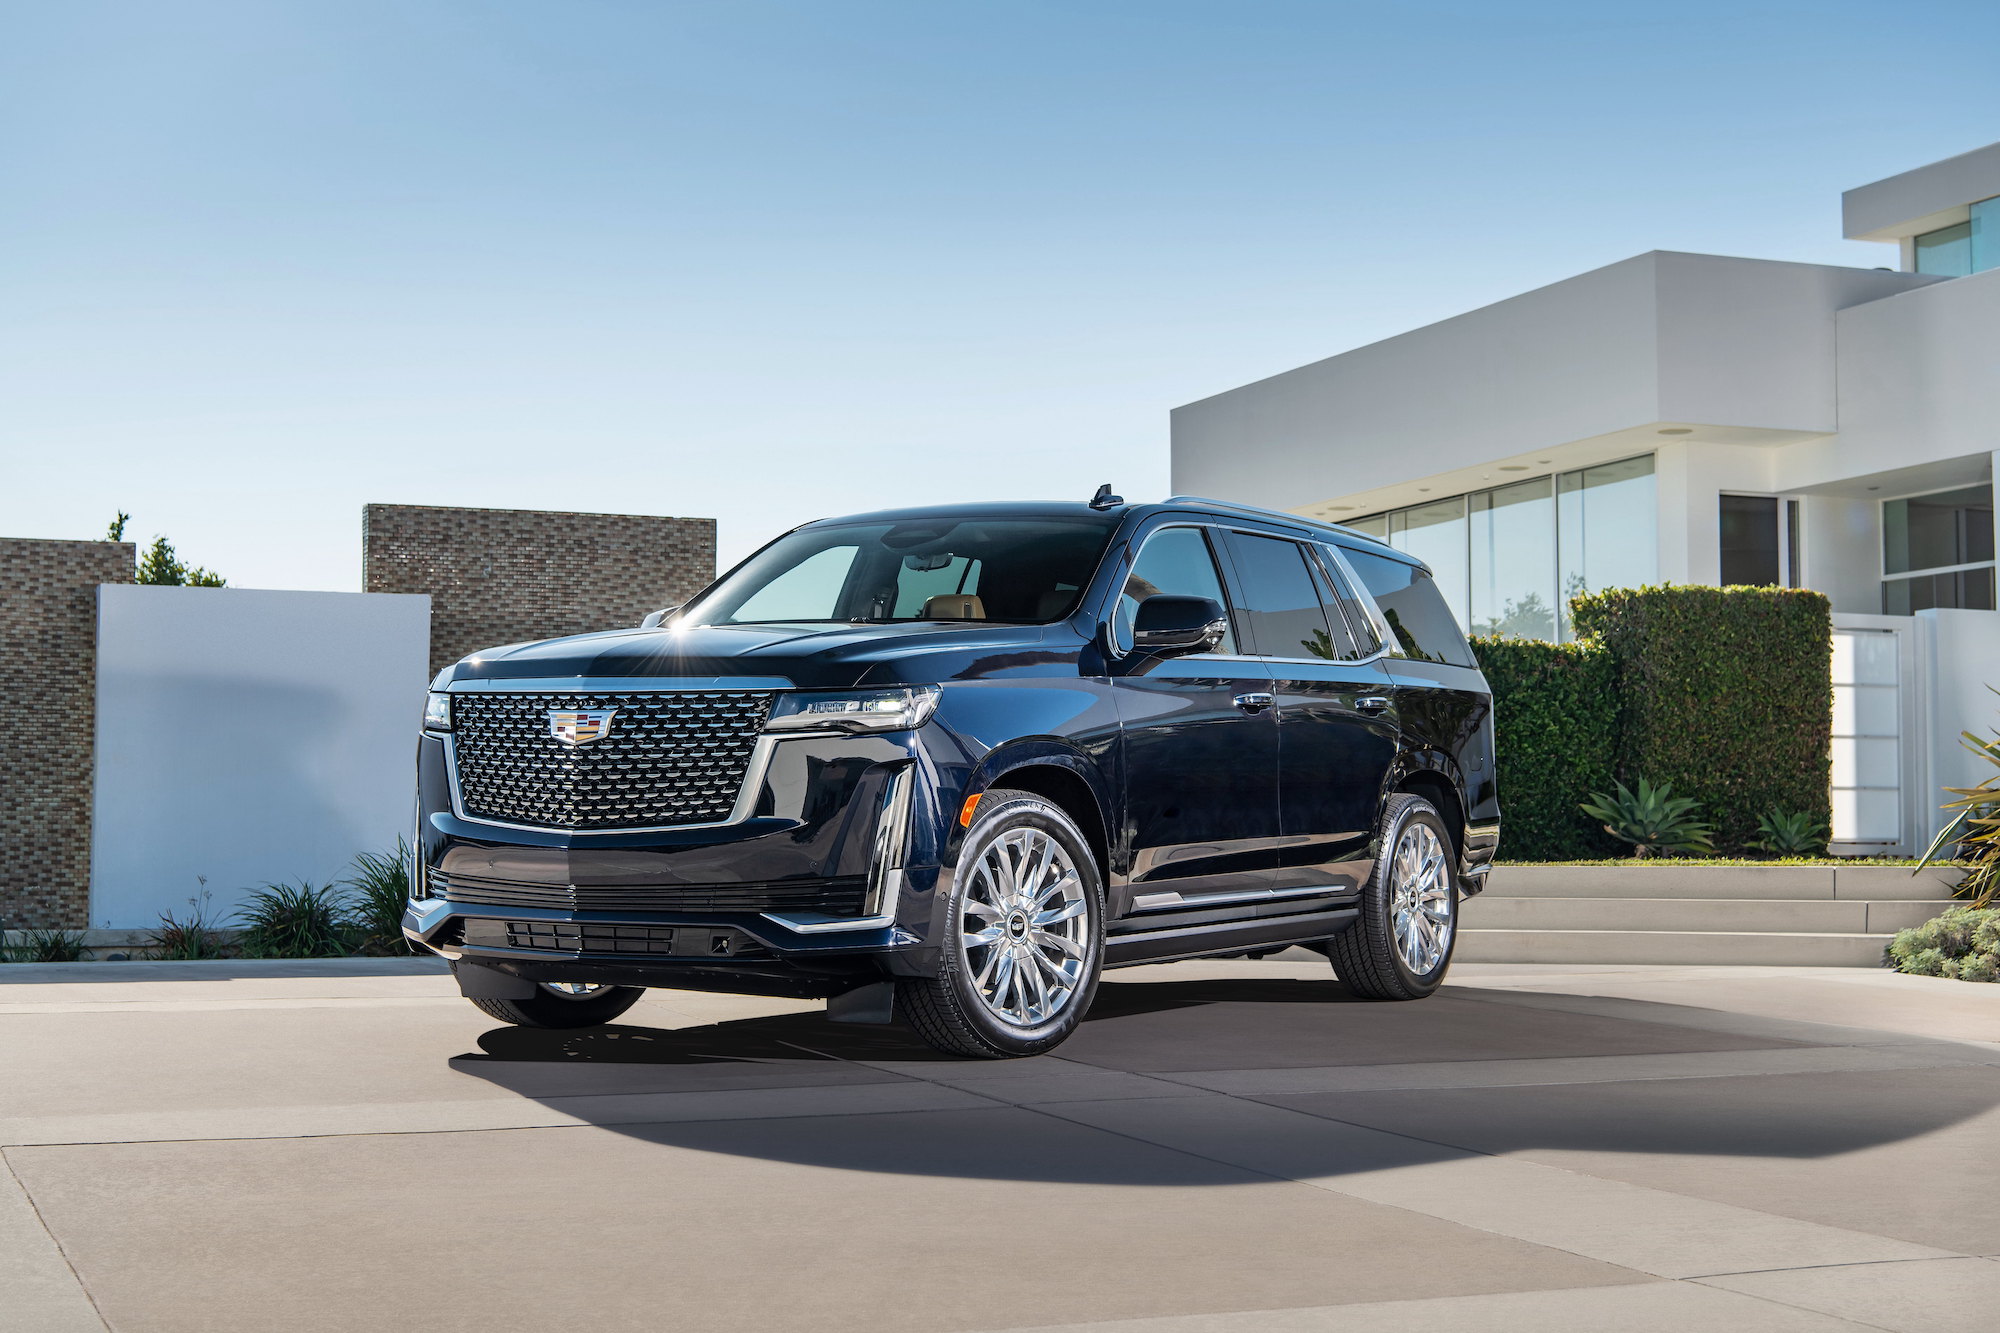 A black 2021 Cadillac Escalade is parked outside a modern home